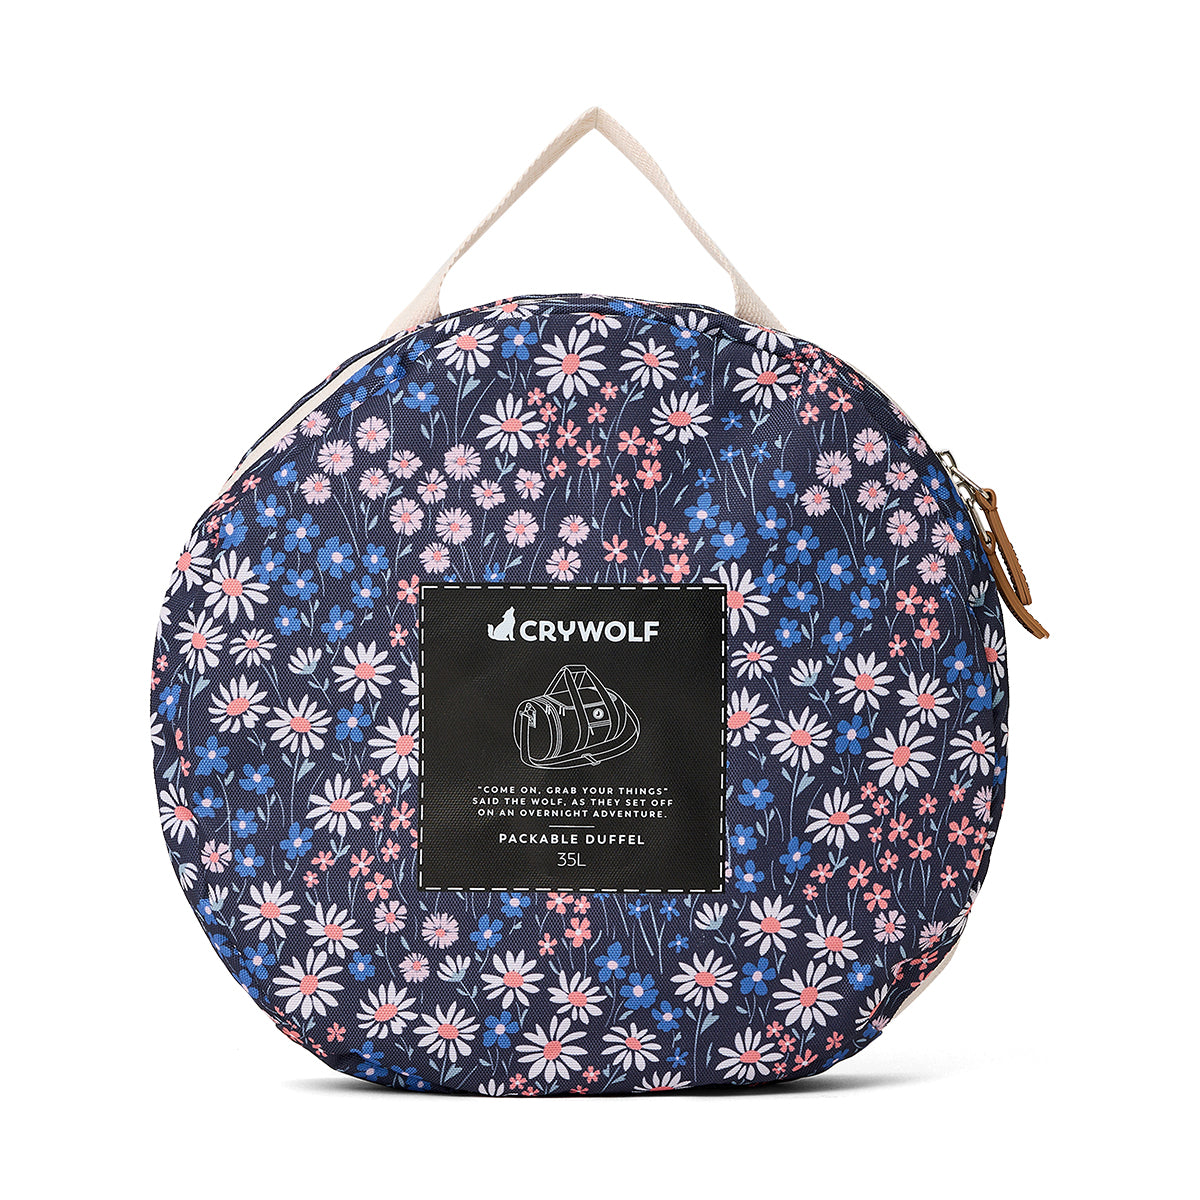 Crywolf | Packable Duffel - Winter Floral